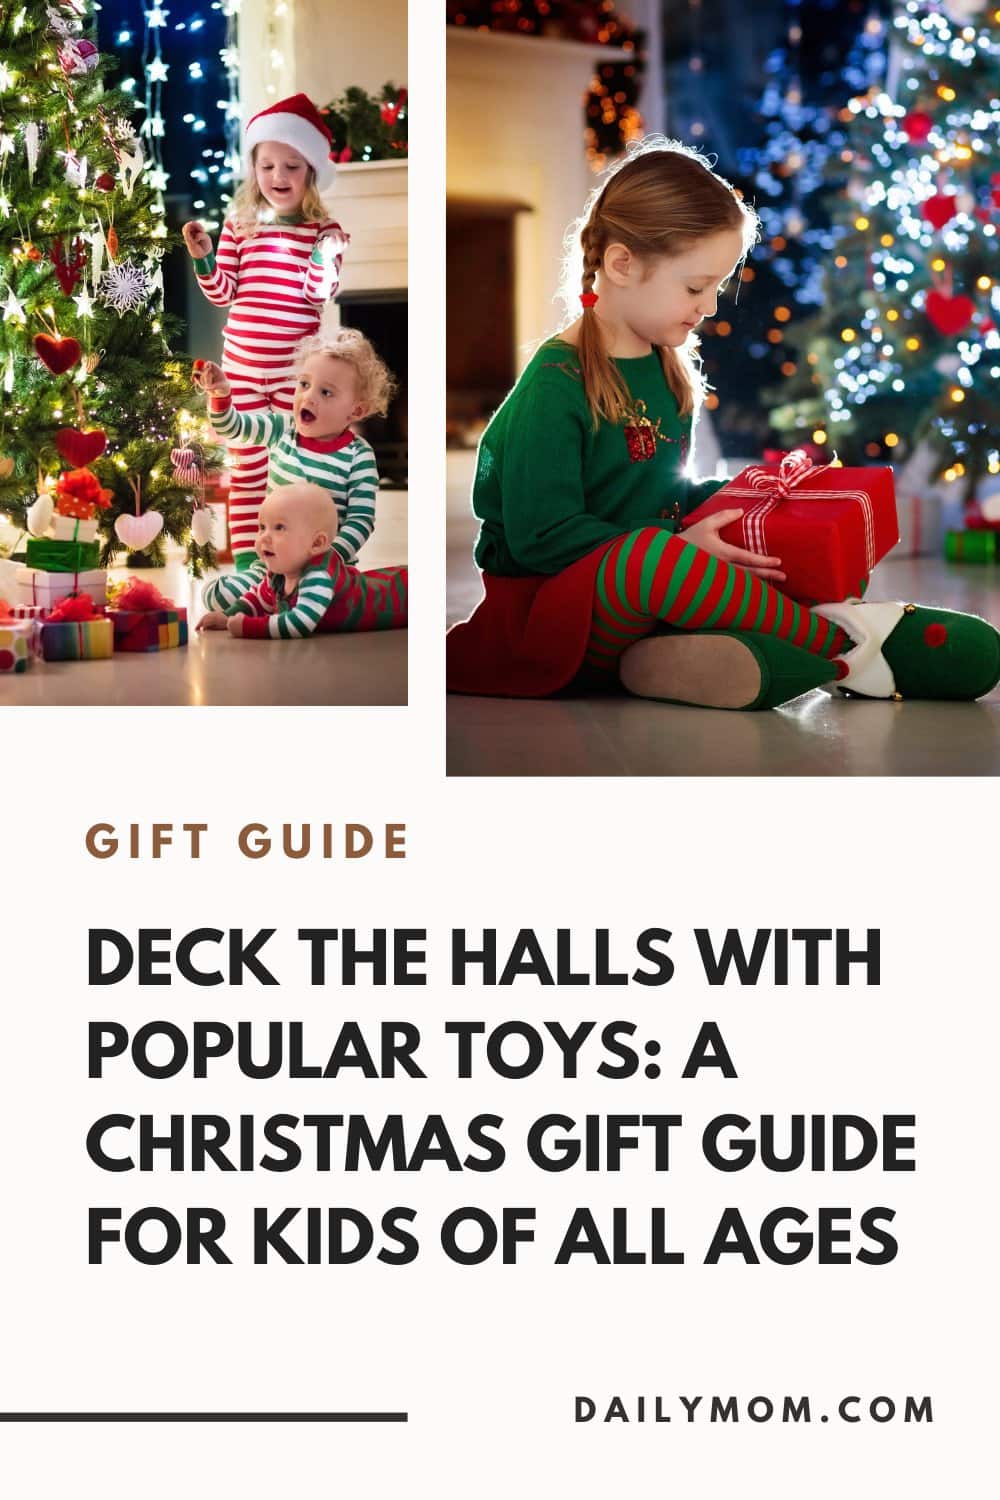 Deck The Halls &Amp; Fill Your Shopping Cart With These Popular Toys For Kids Of All Ages 79 Daily Mom, Magazine For Families